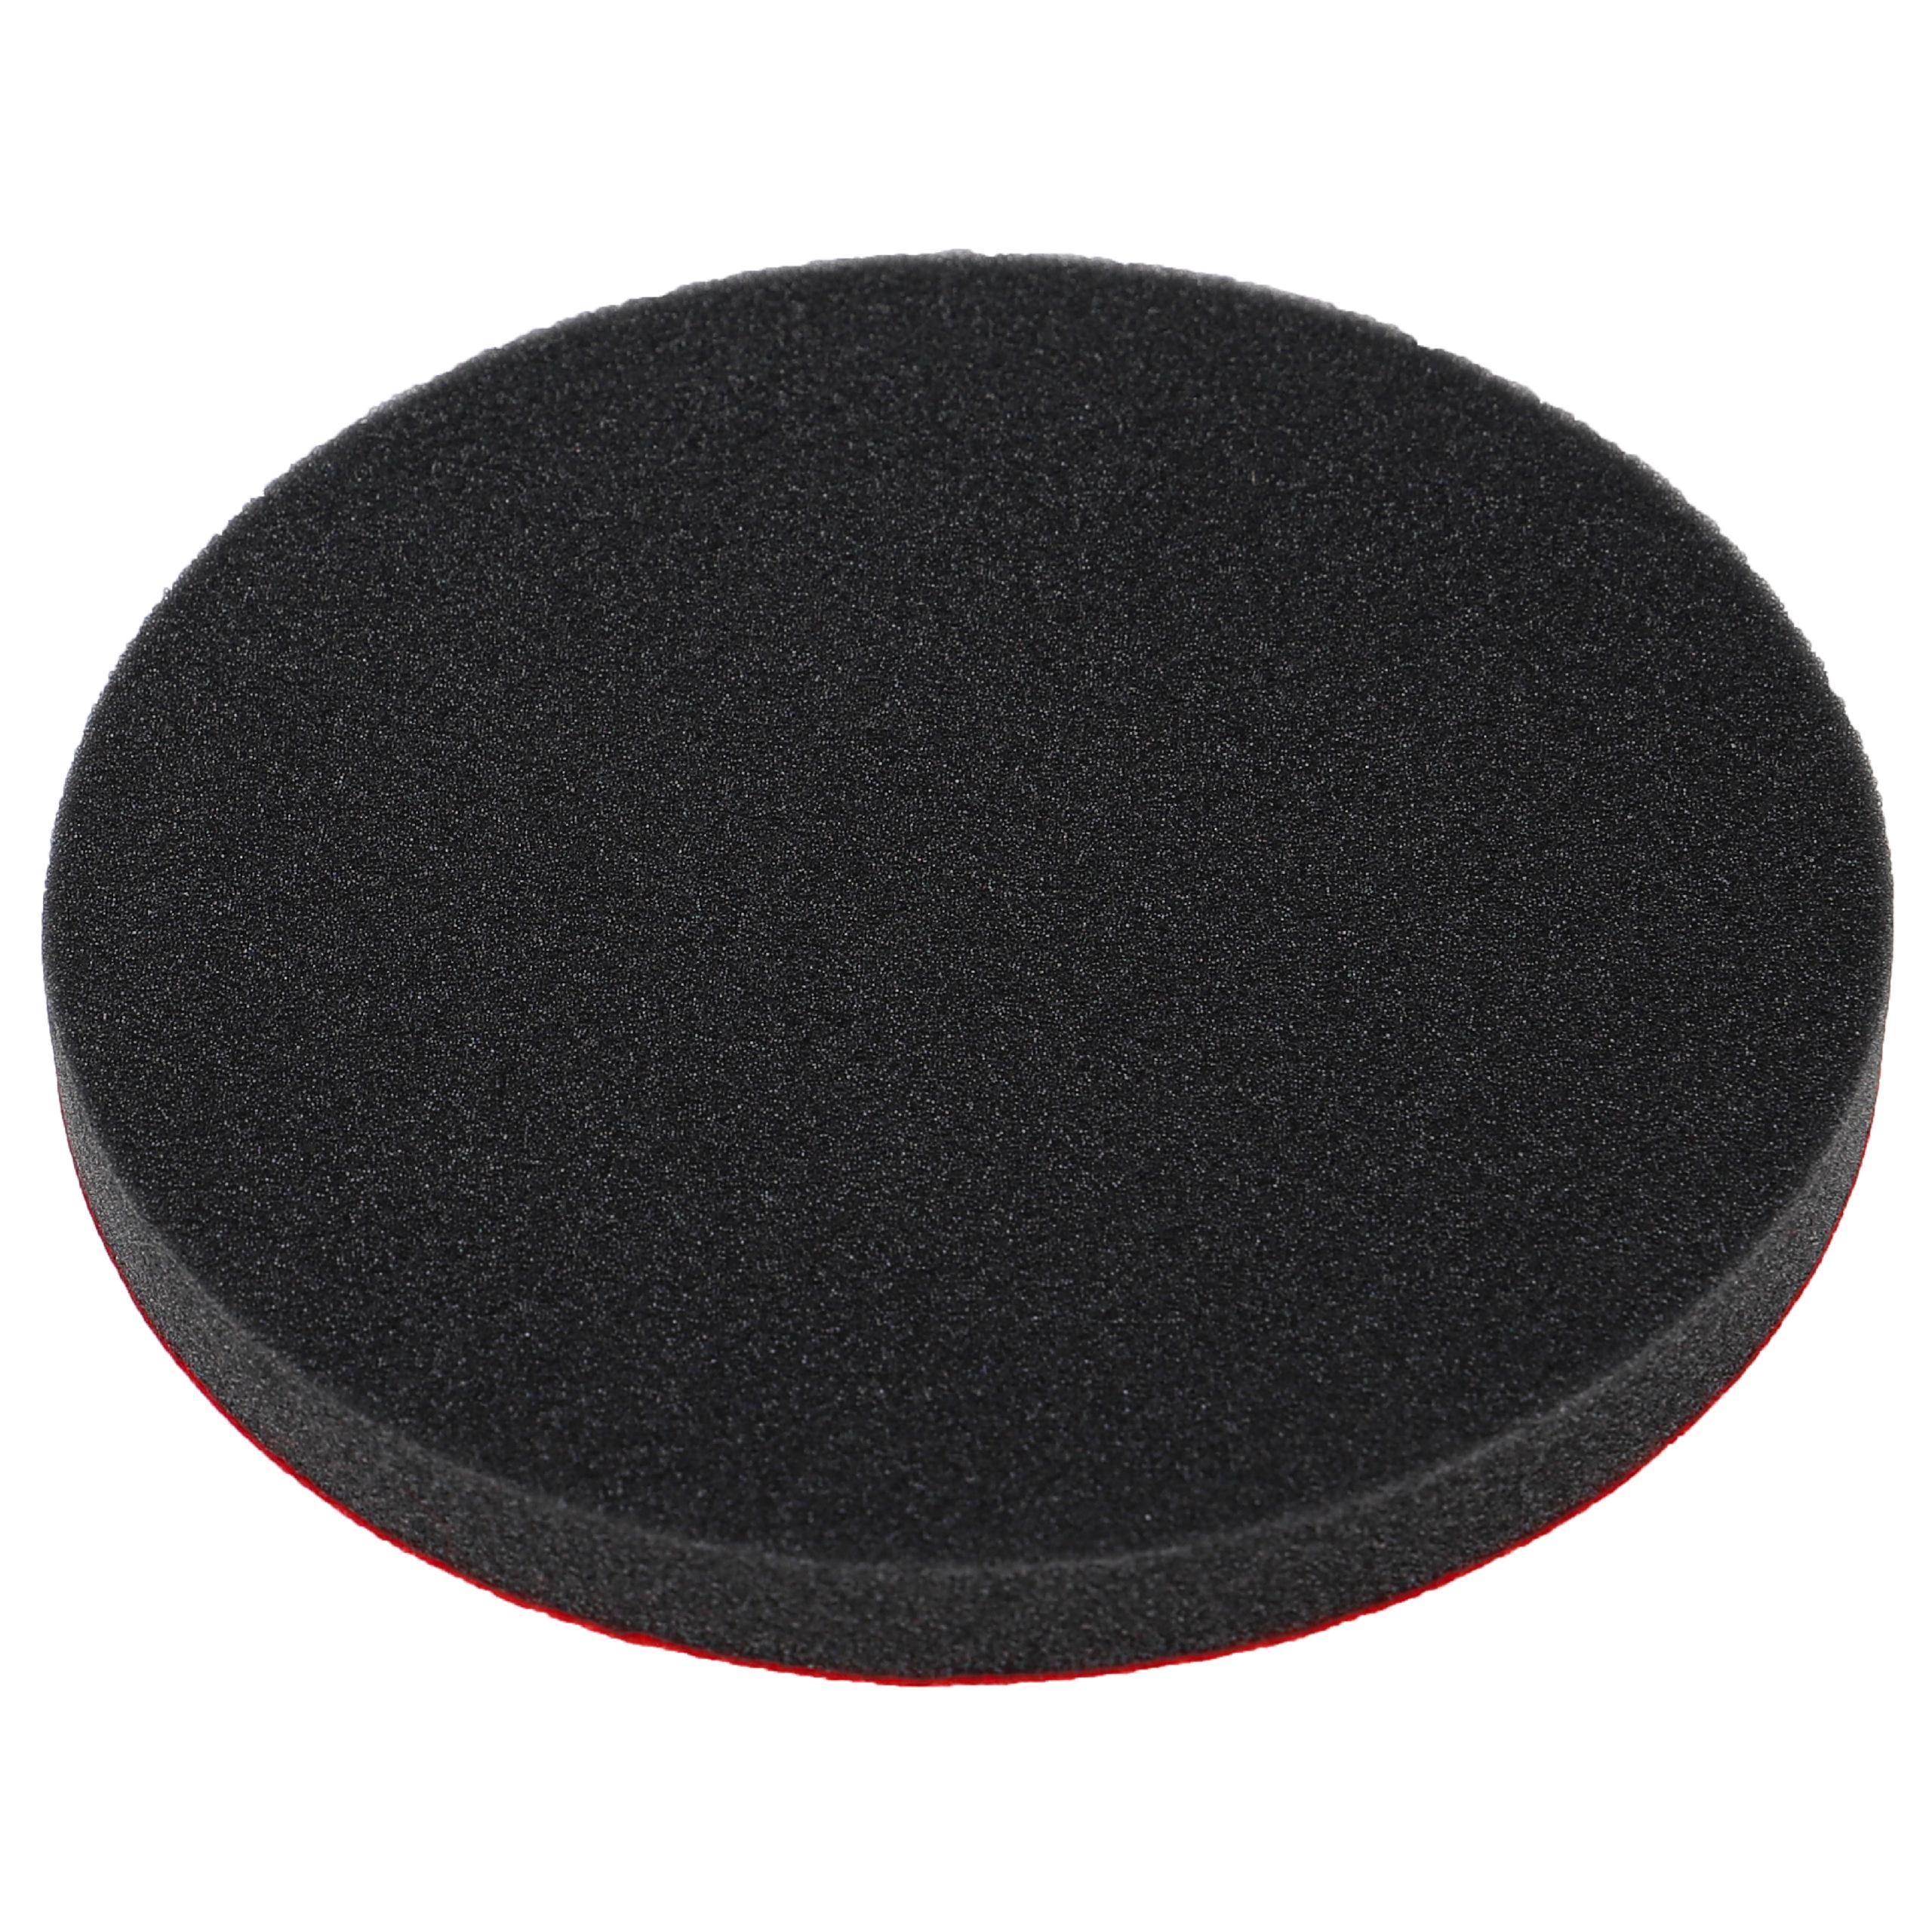 Polishing Pad as Replacement for Bosch 2609256052, 3165140386555 for Polishing Machines - 15 cm Diameter, 16 g